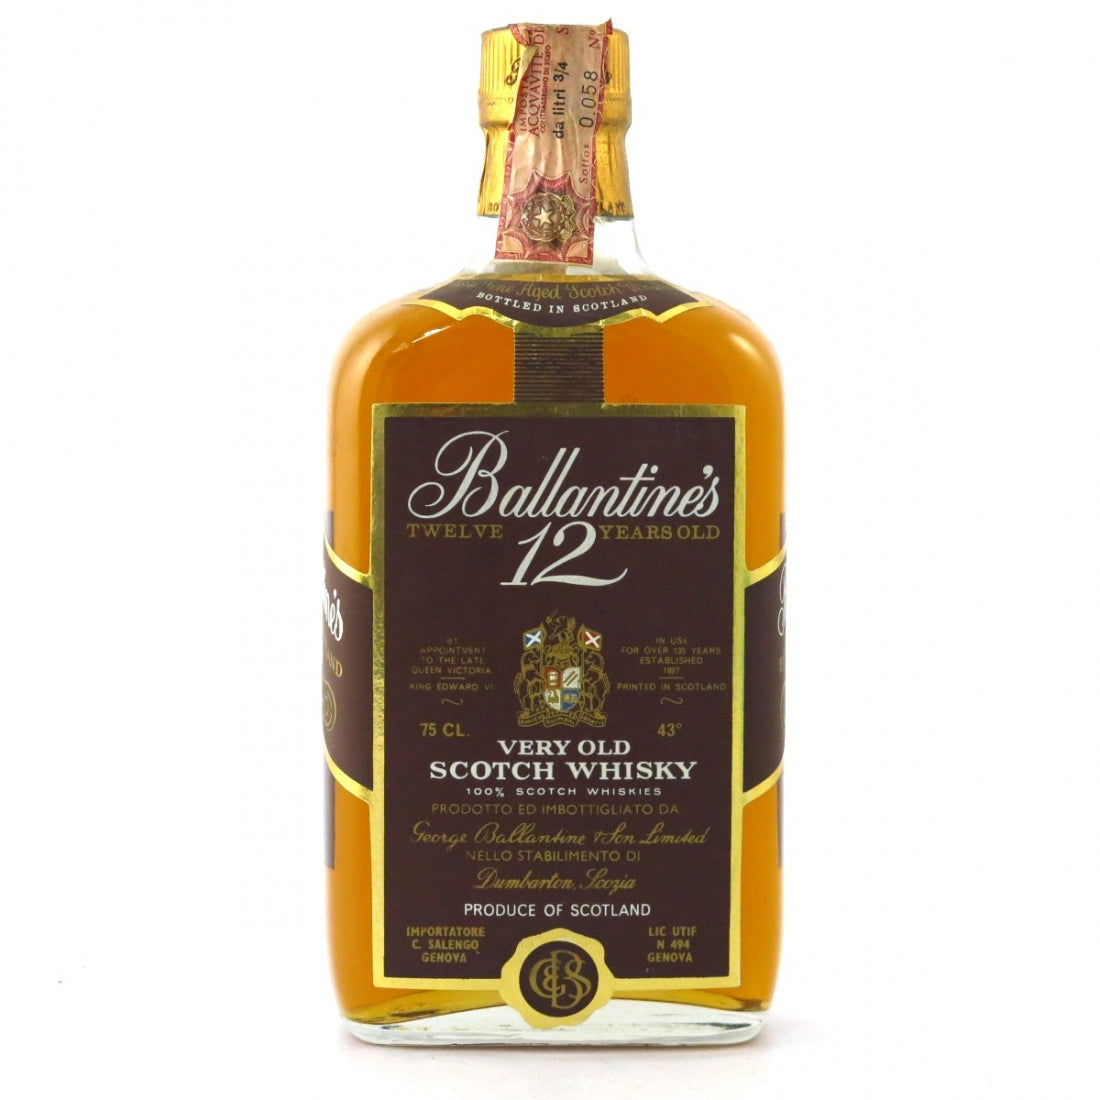 BUY] Ballantine's 12 Year Old (Bottled 1970s/1980s) Very Old Scotch at